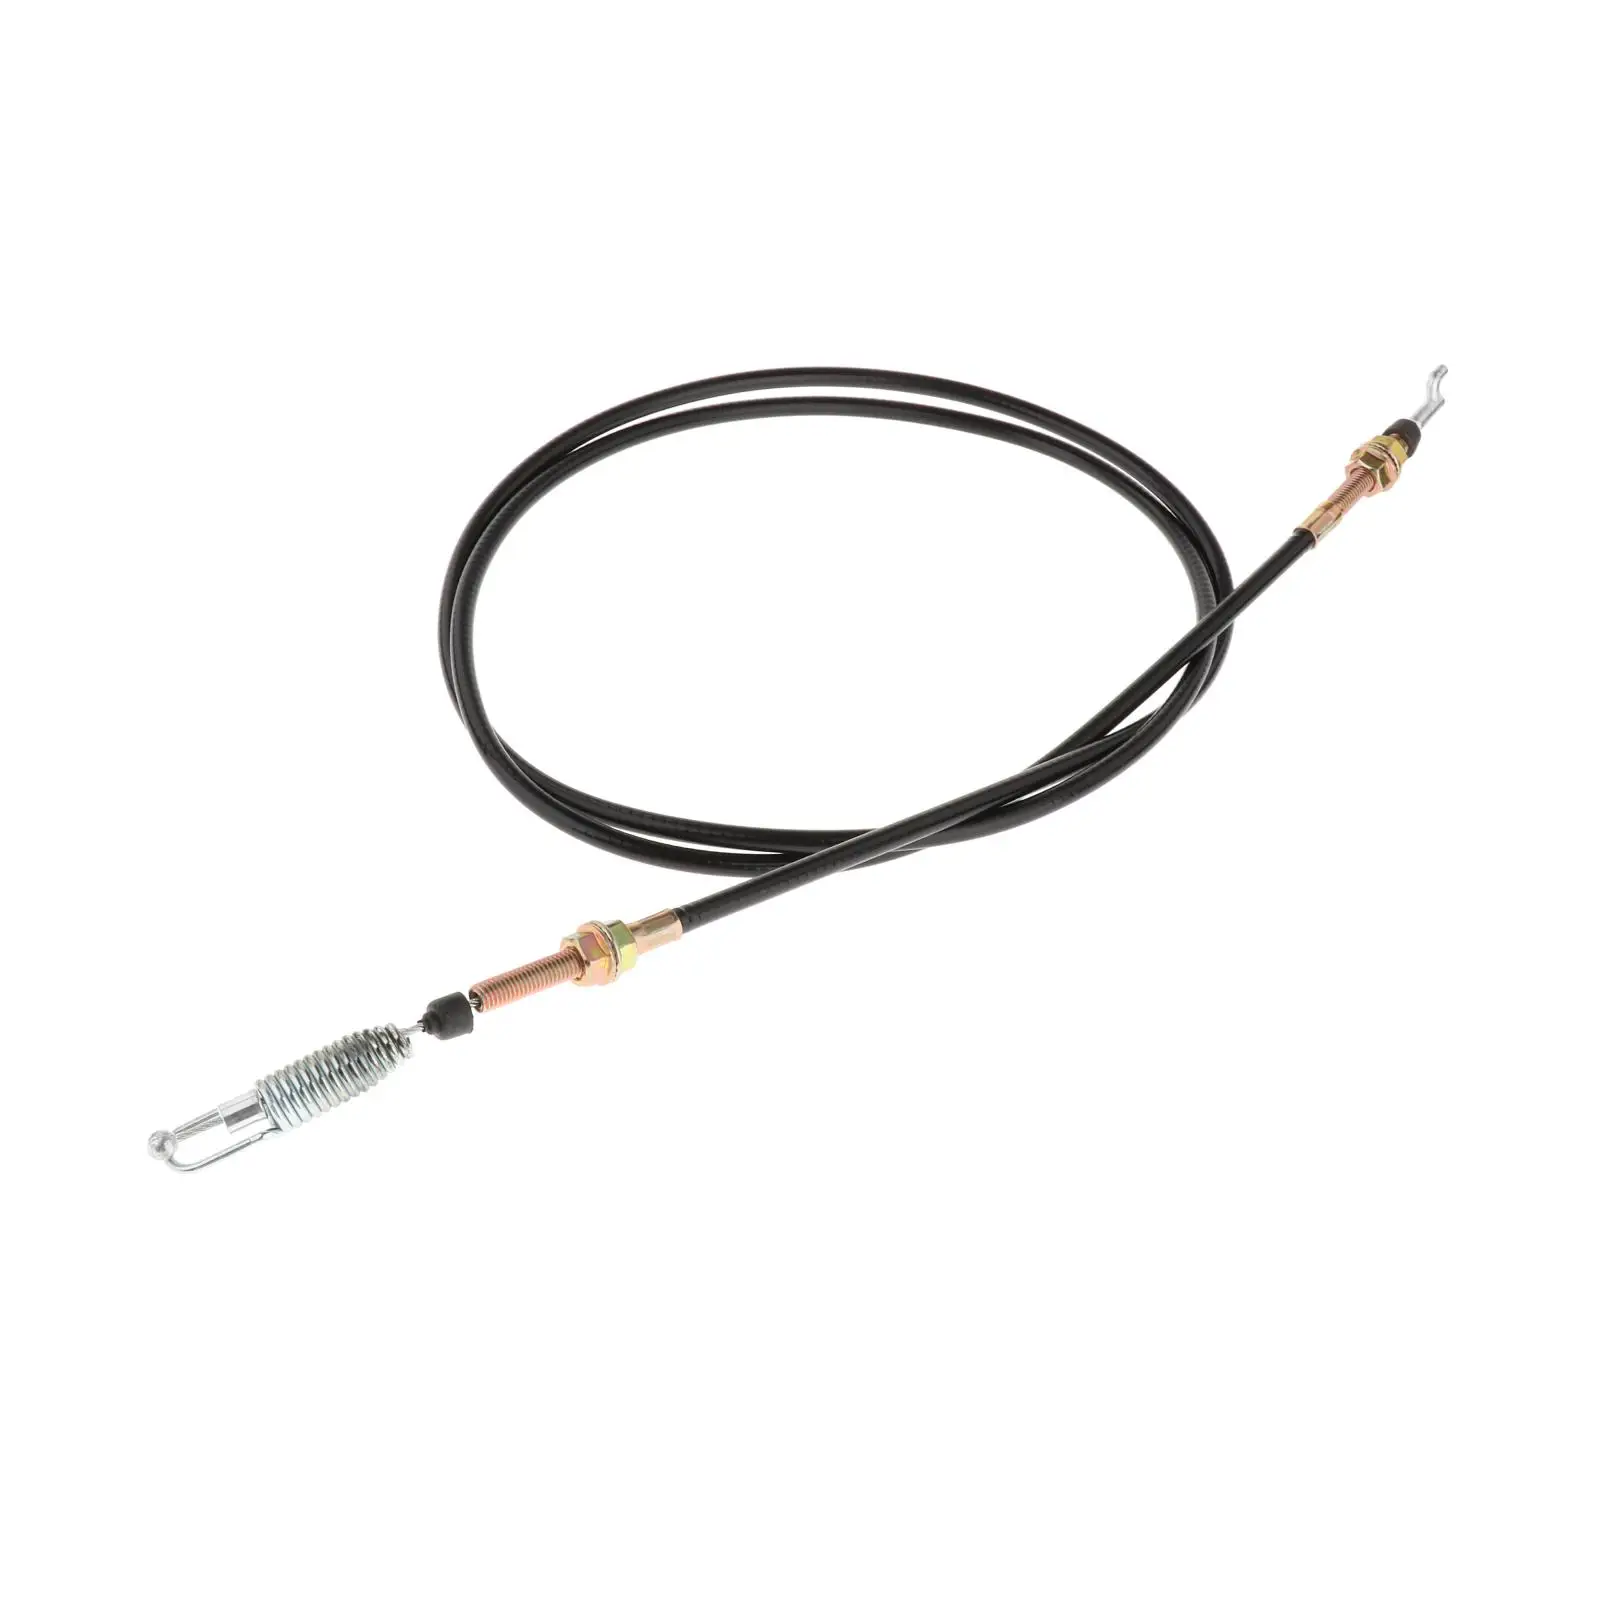 Shifter Cable 2-11082 for Chuck Wagon Go-Karts CW-11 CW-413, ,Easy to Install